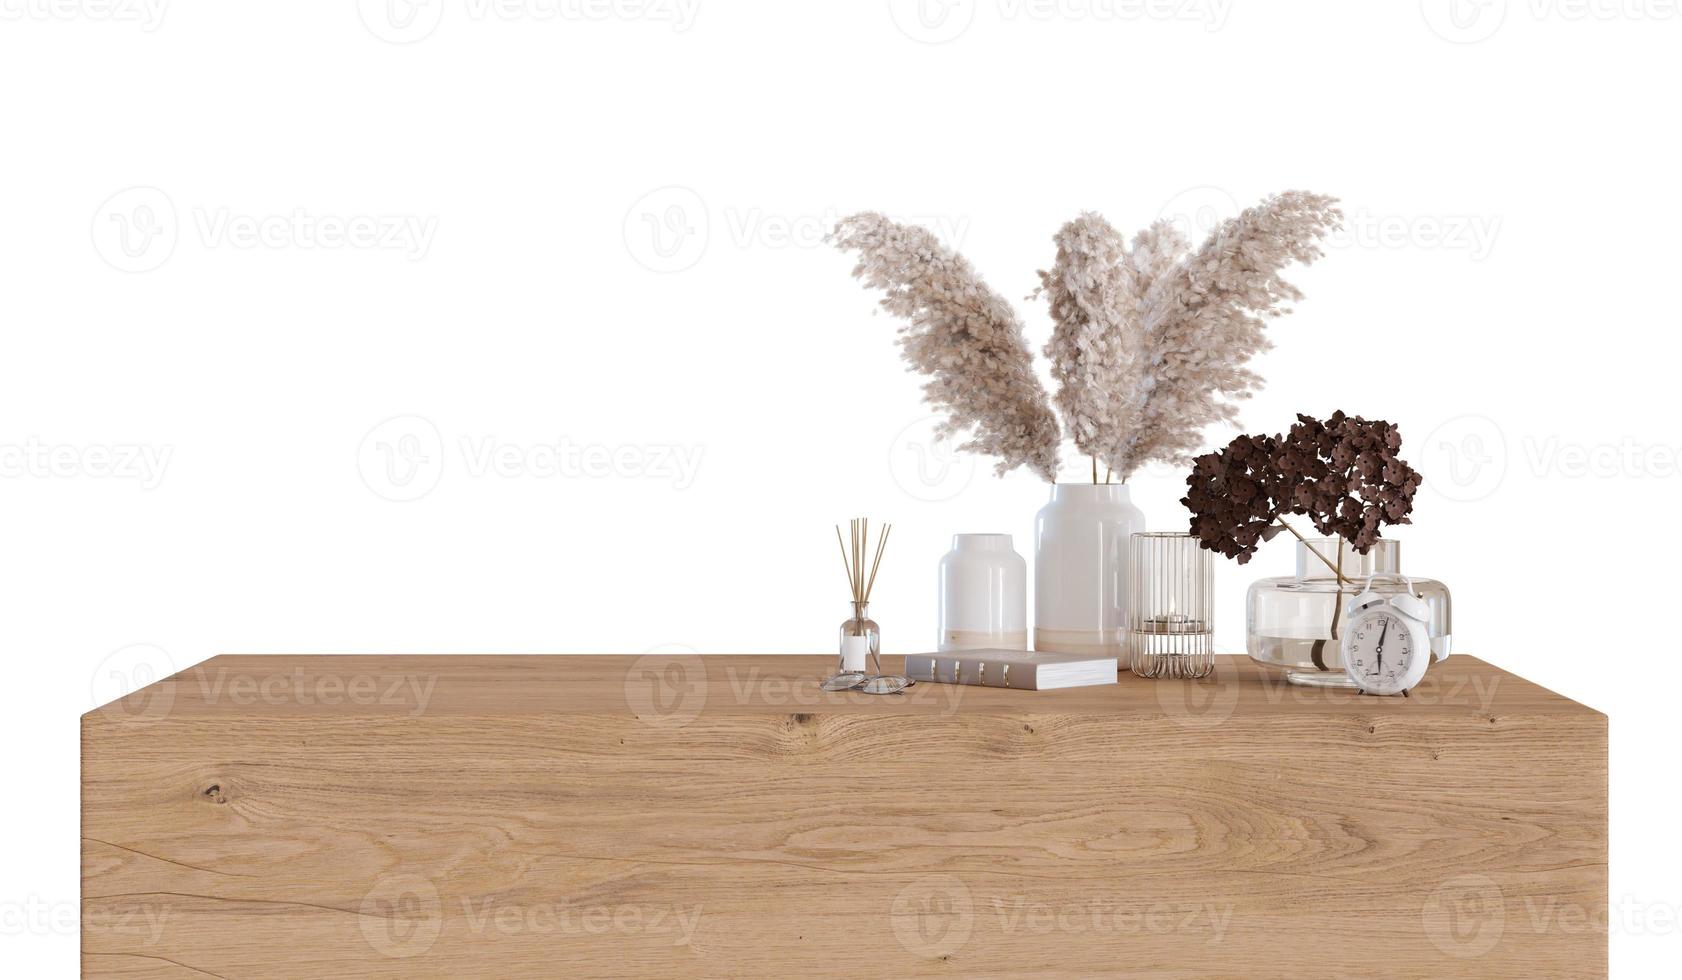 Modern, wooden table with pampas grass isolated on white background. Front view. Cut out furniture. Contemporary interior design element. Copy space for your object, product presentation. 3D render. photo